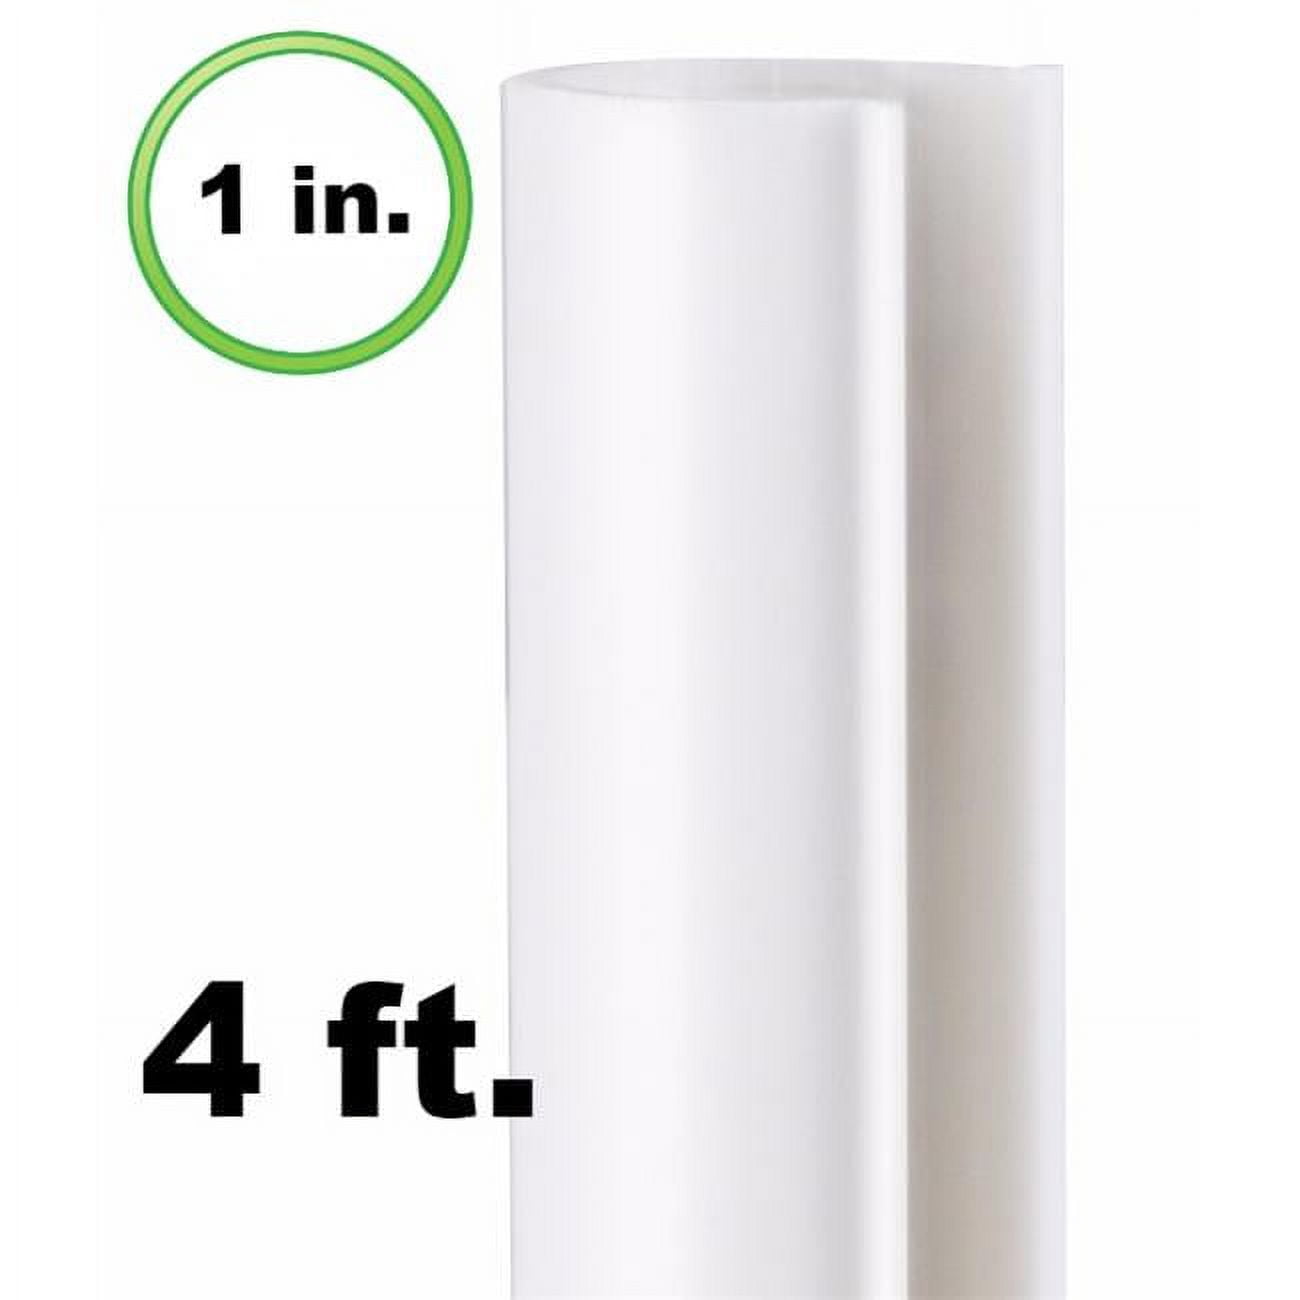 03 4 Ft. X 1 In. Snap Clamp Abs For 1 In. Pvc Pipe